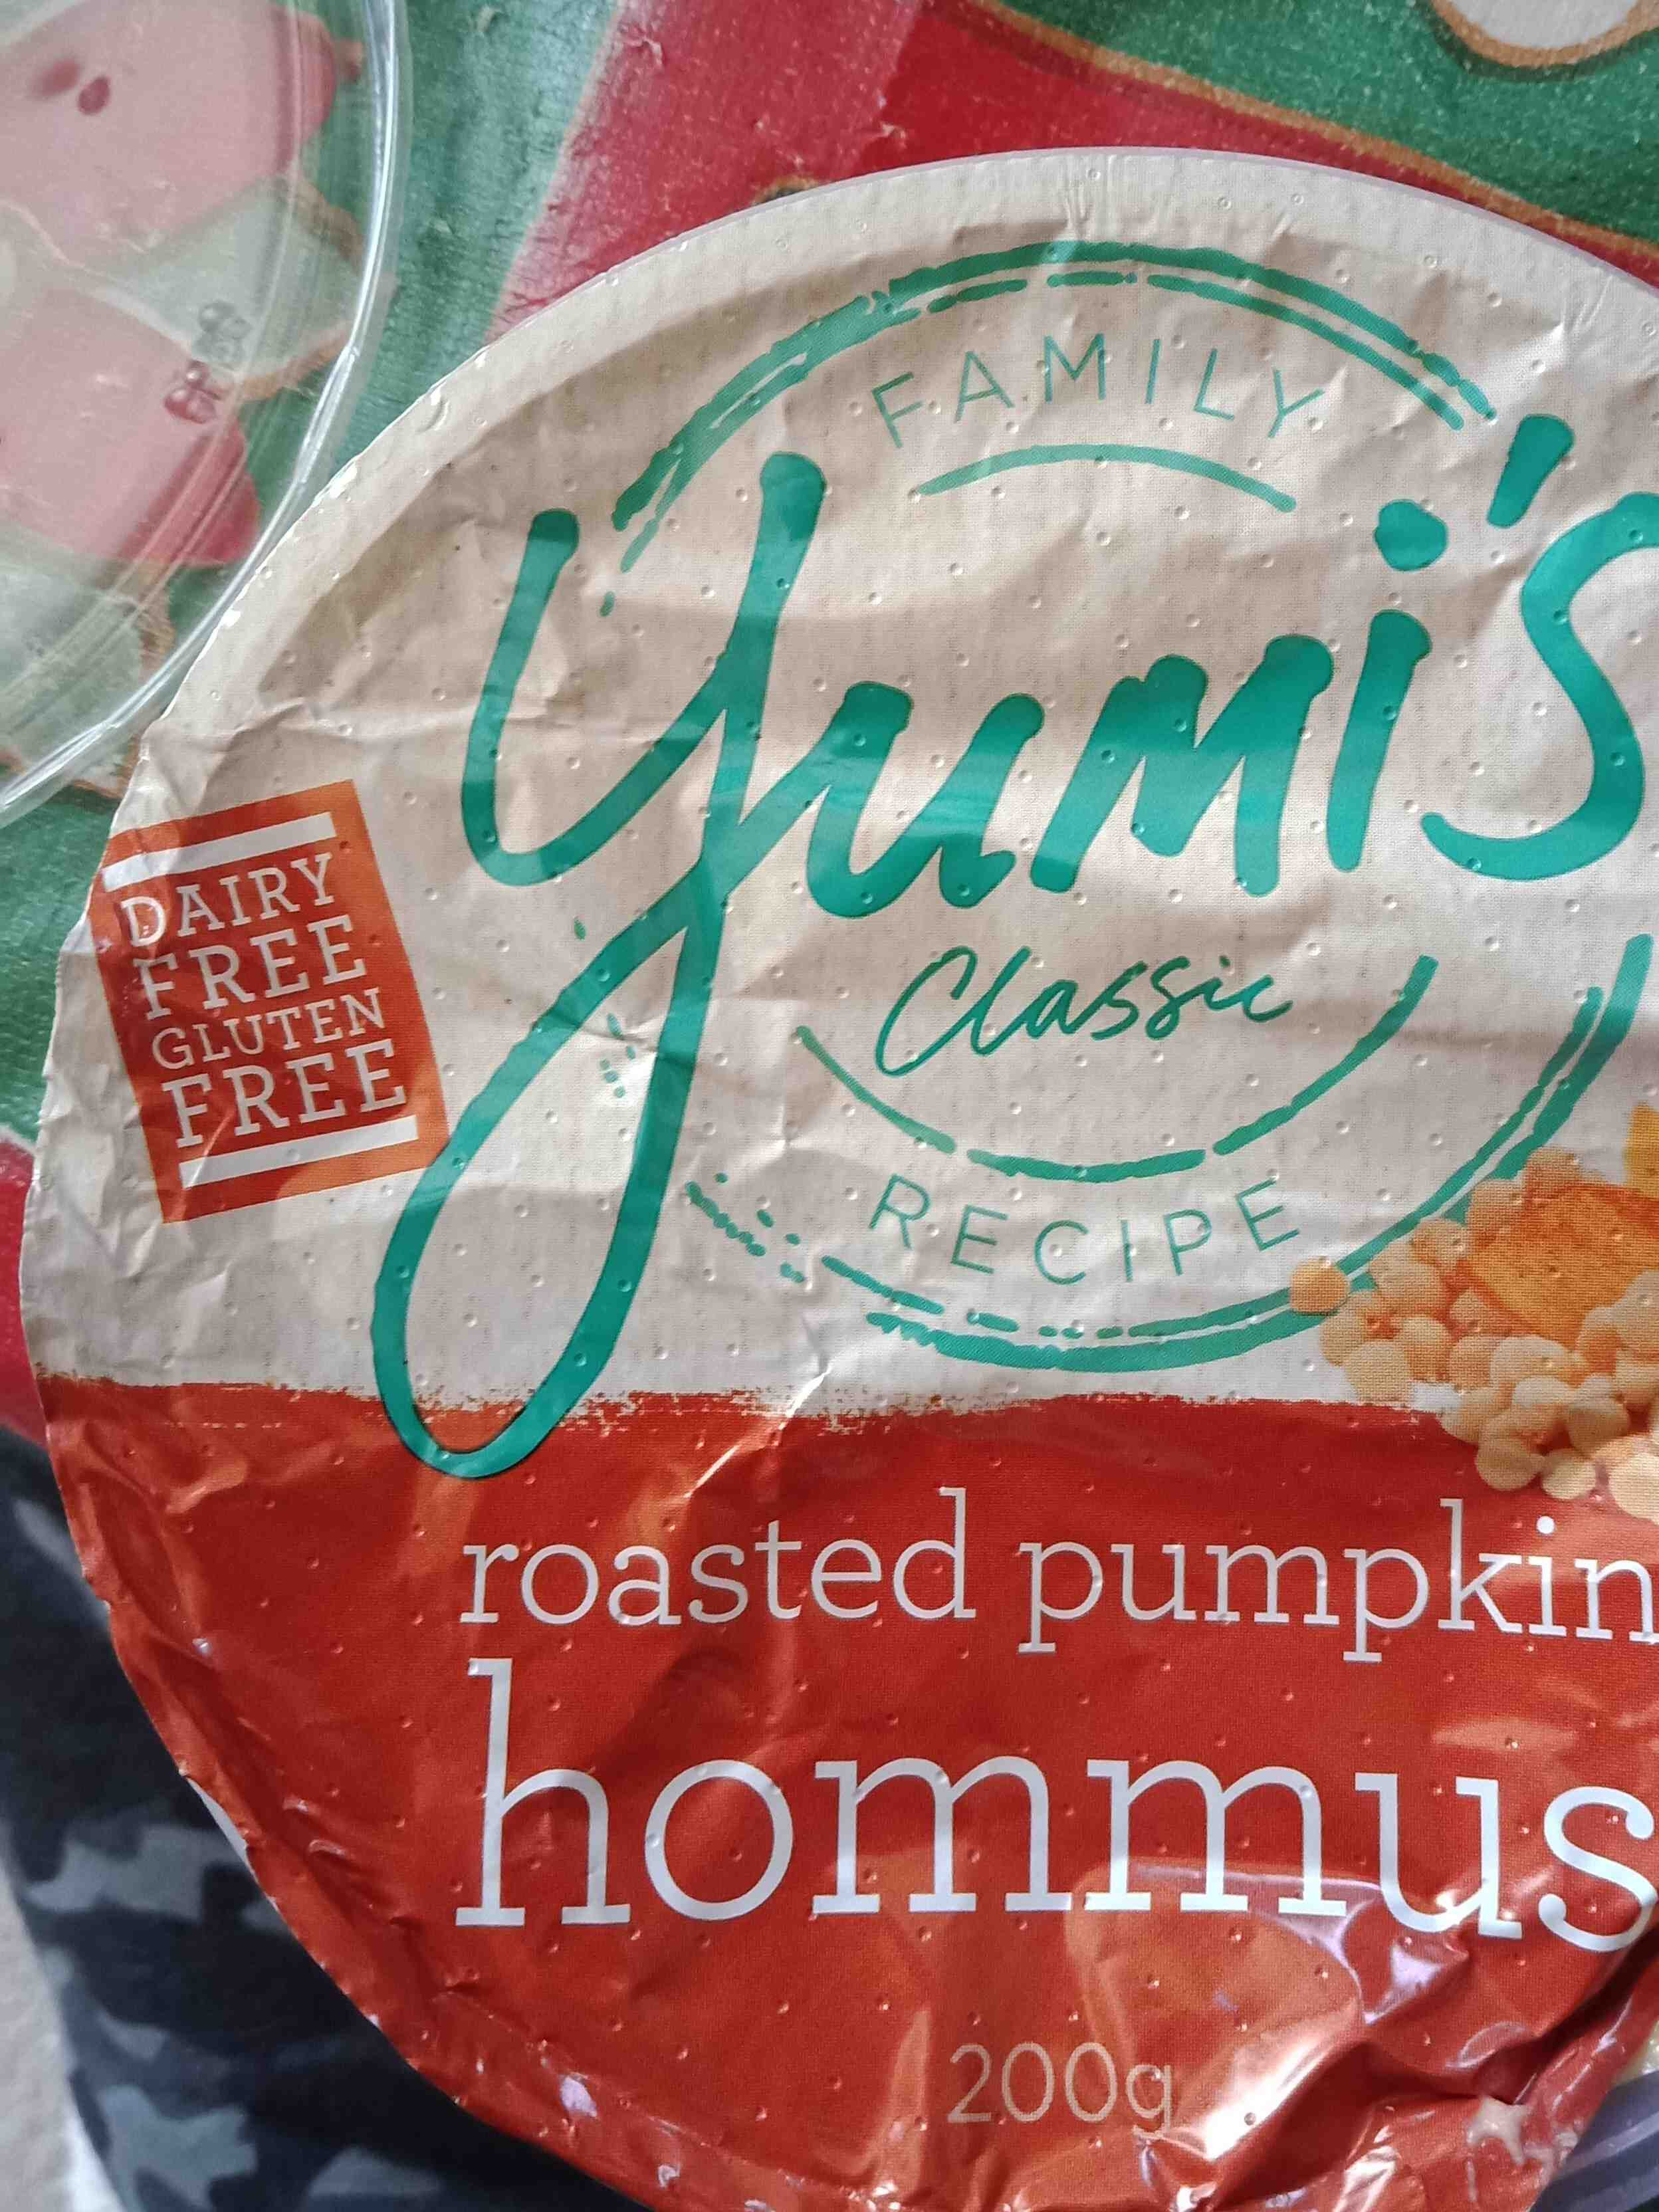 yumi's roasted pumpkin and hommus - Product